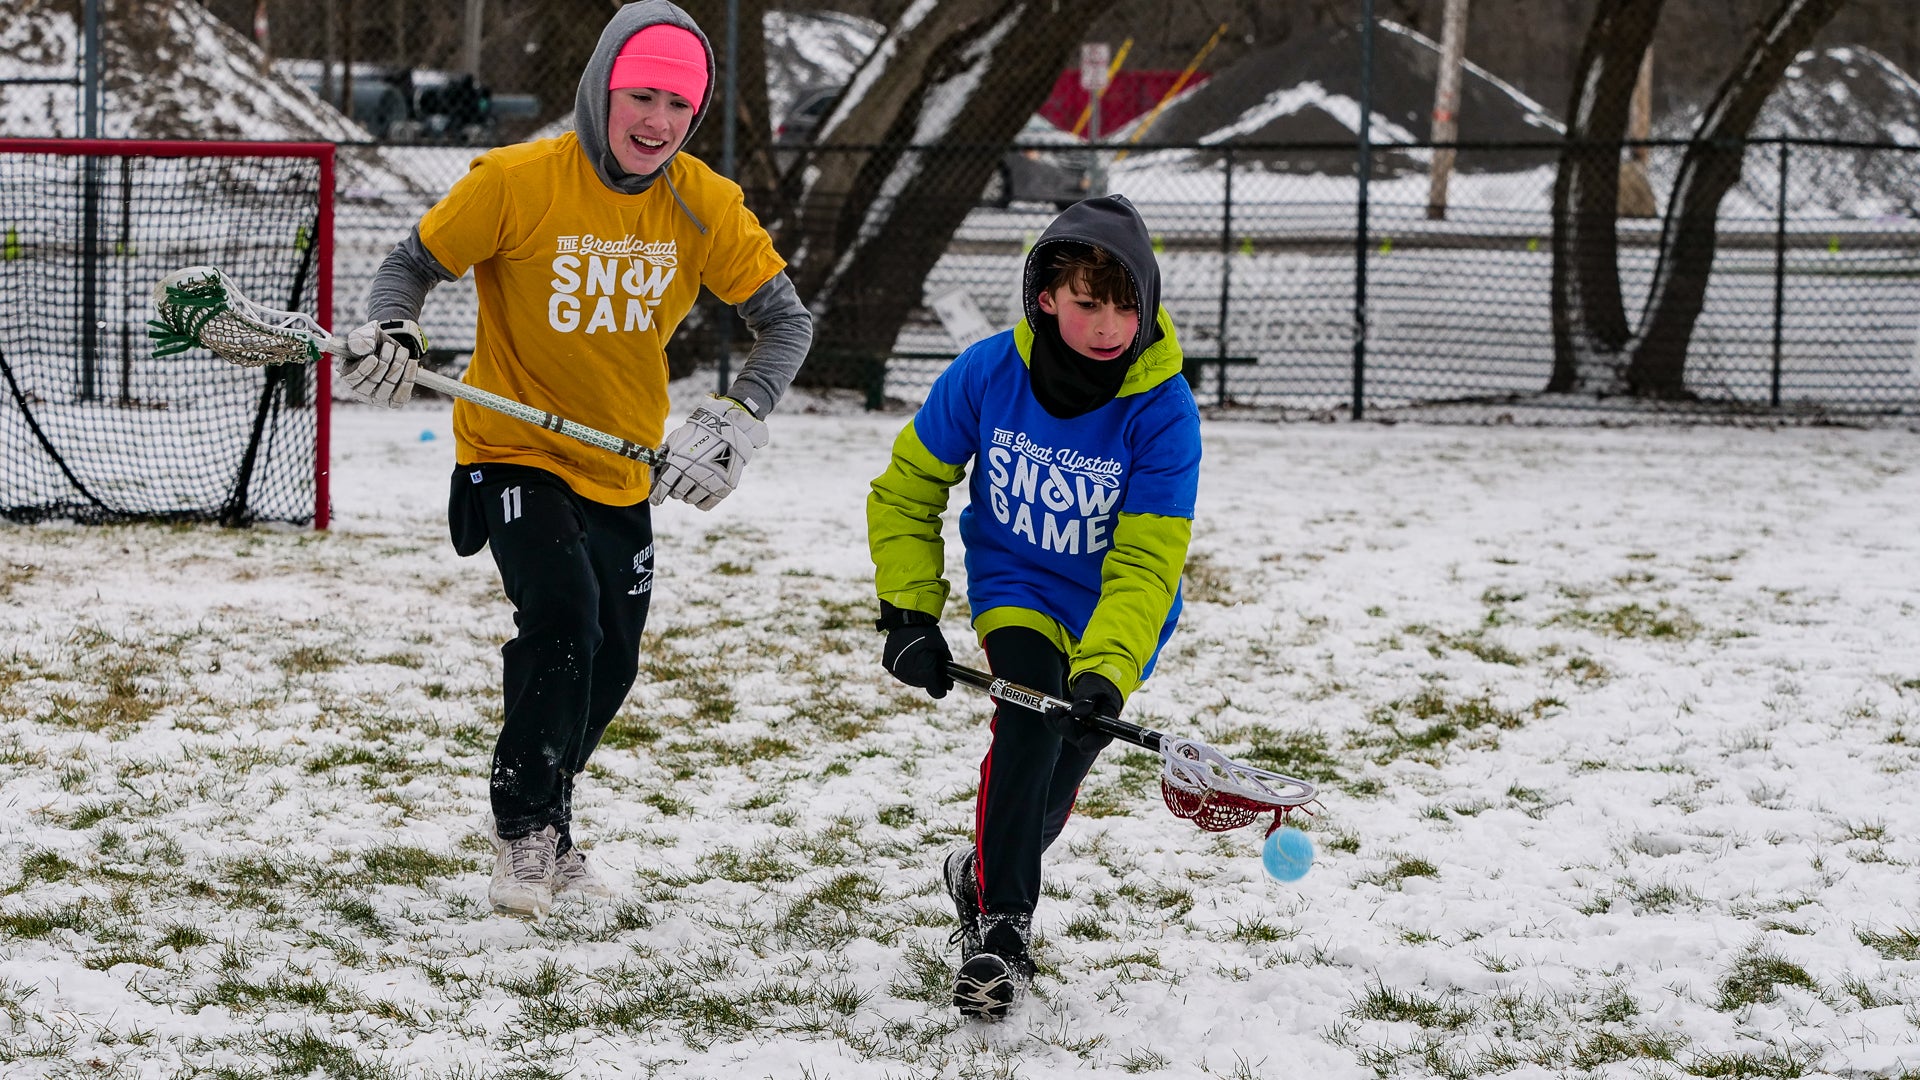 The 2023 Great Upstate Snow Game